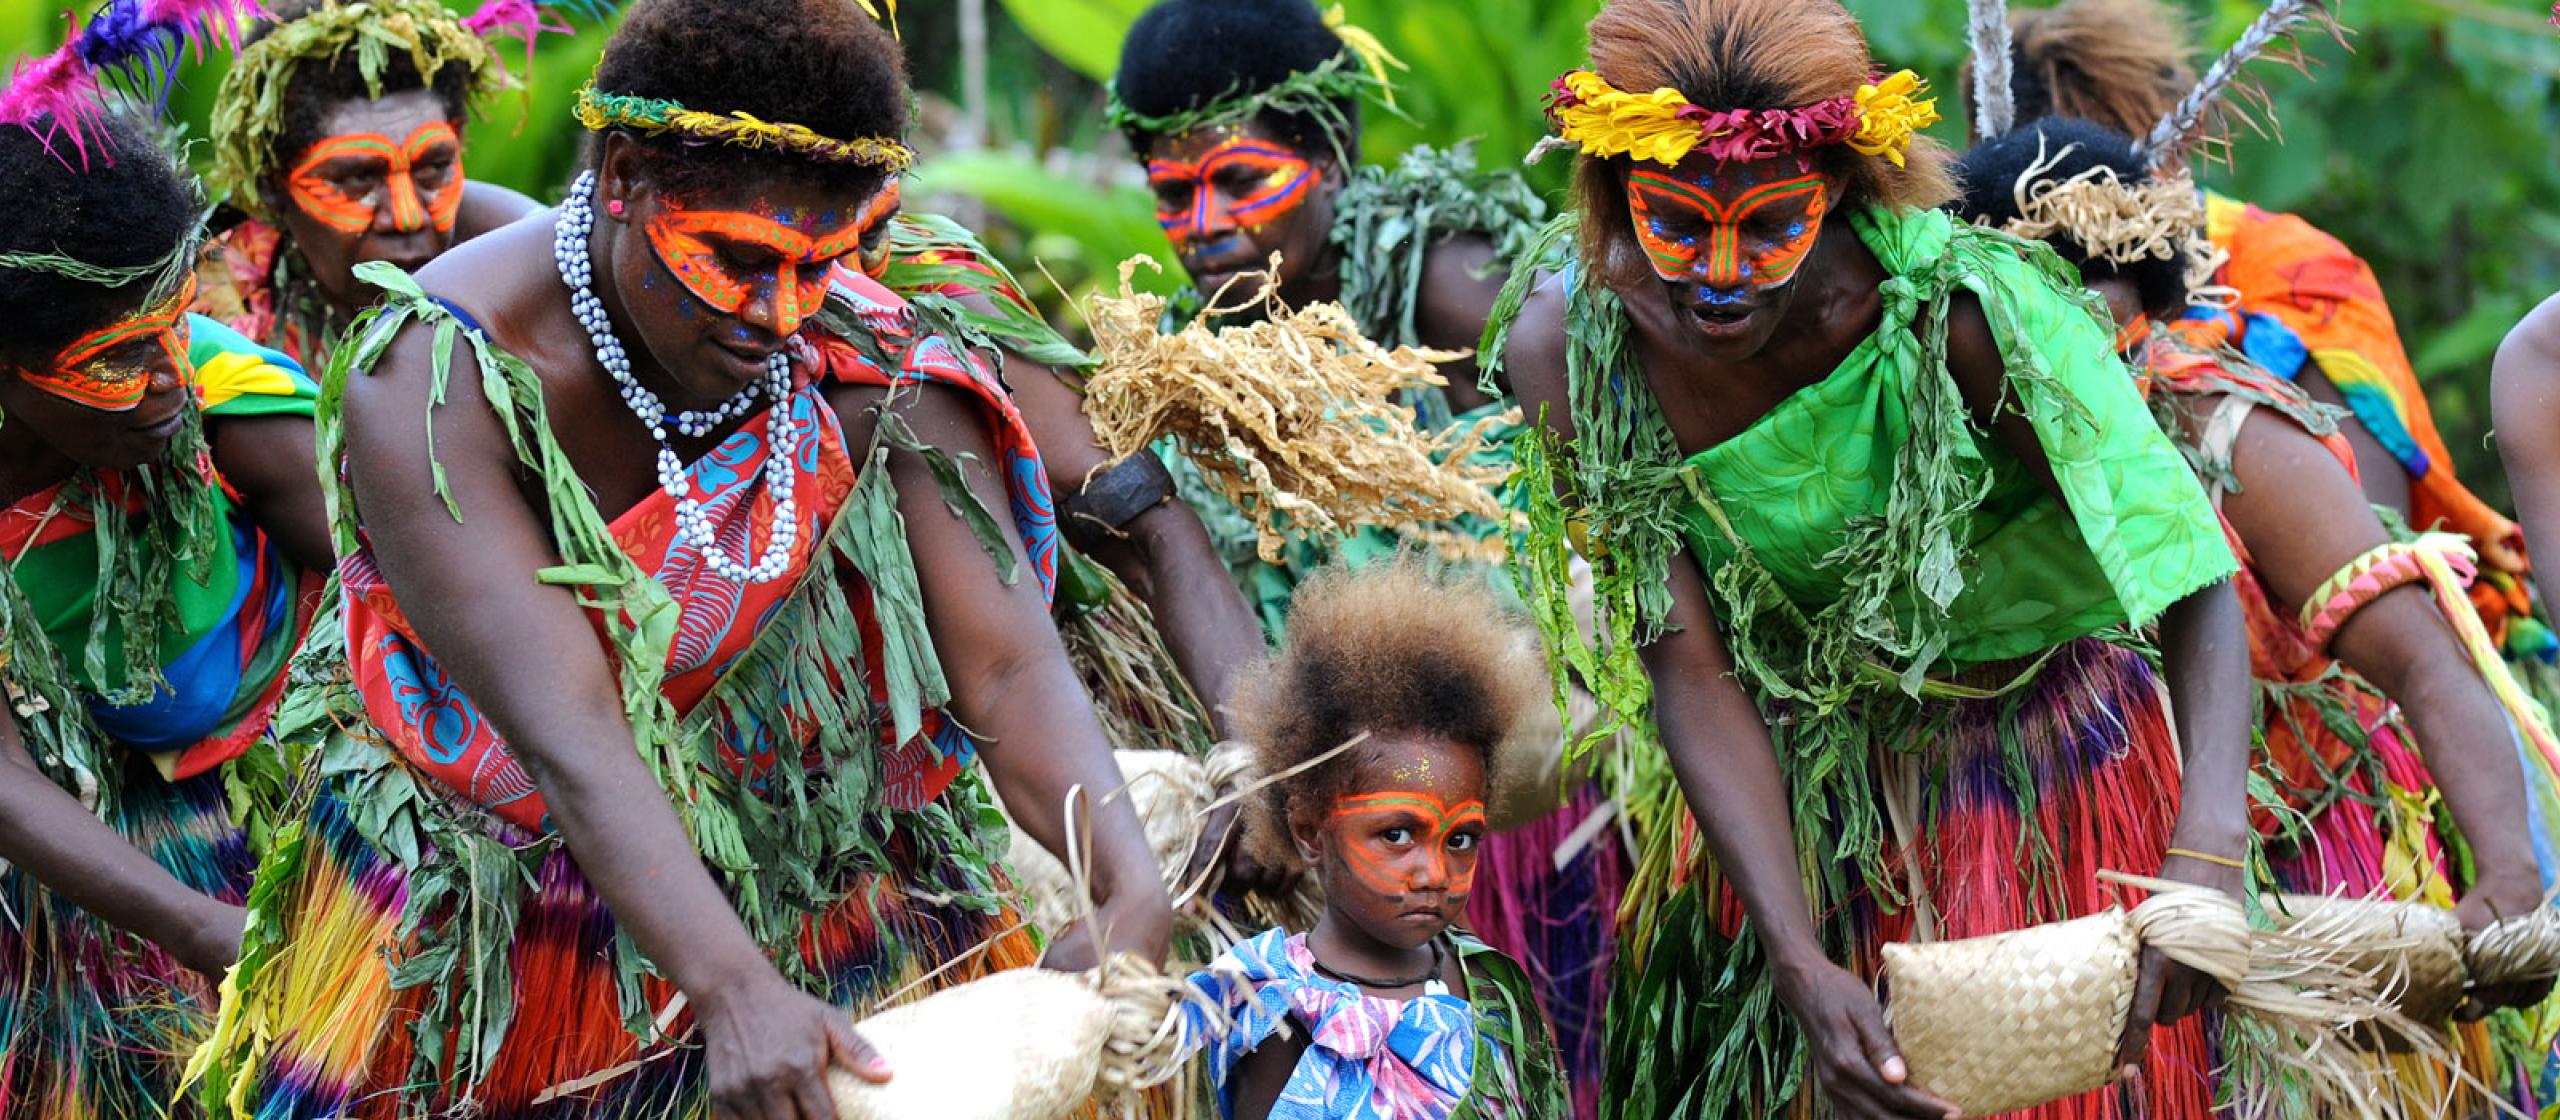 Vanuatuan's in traditional clothes performing dance ceremony